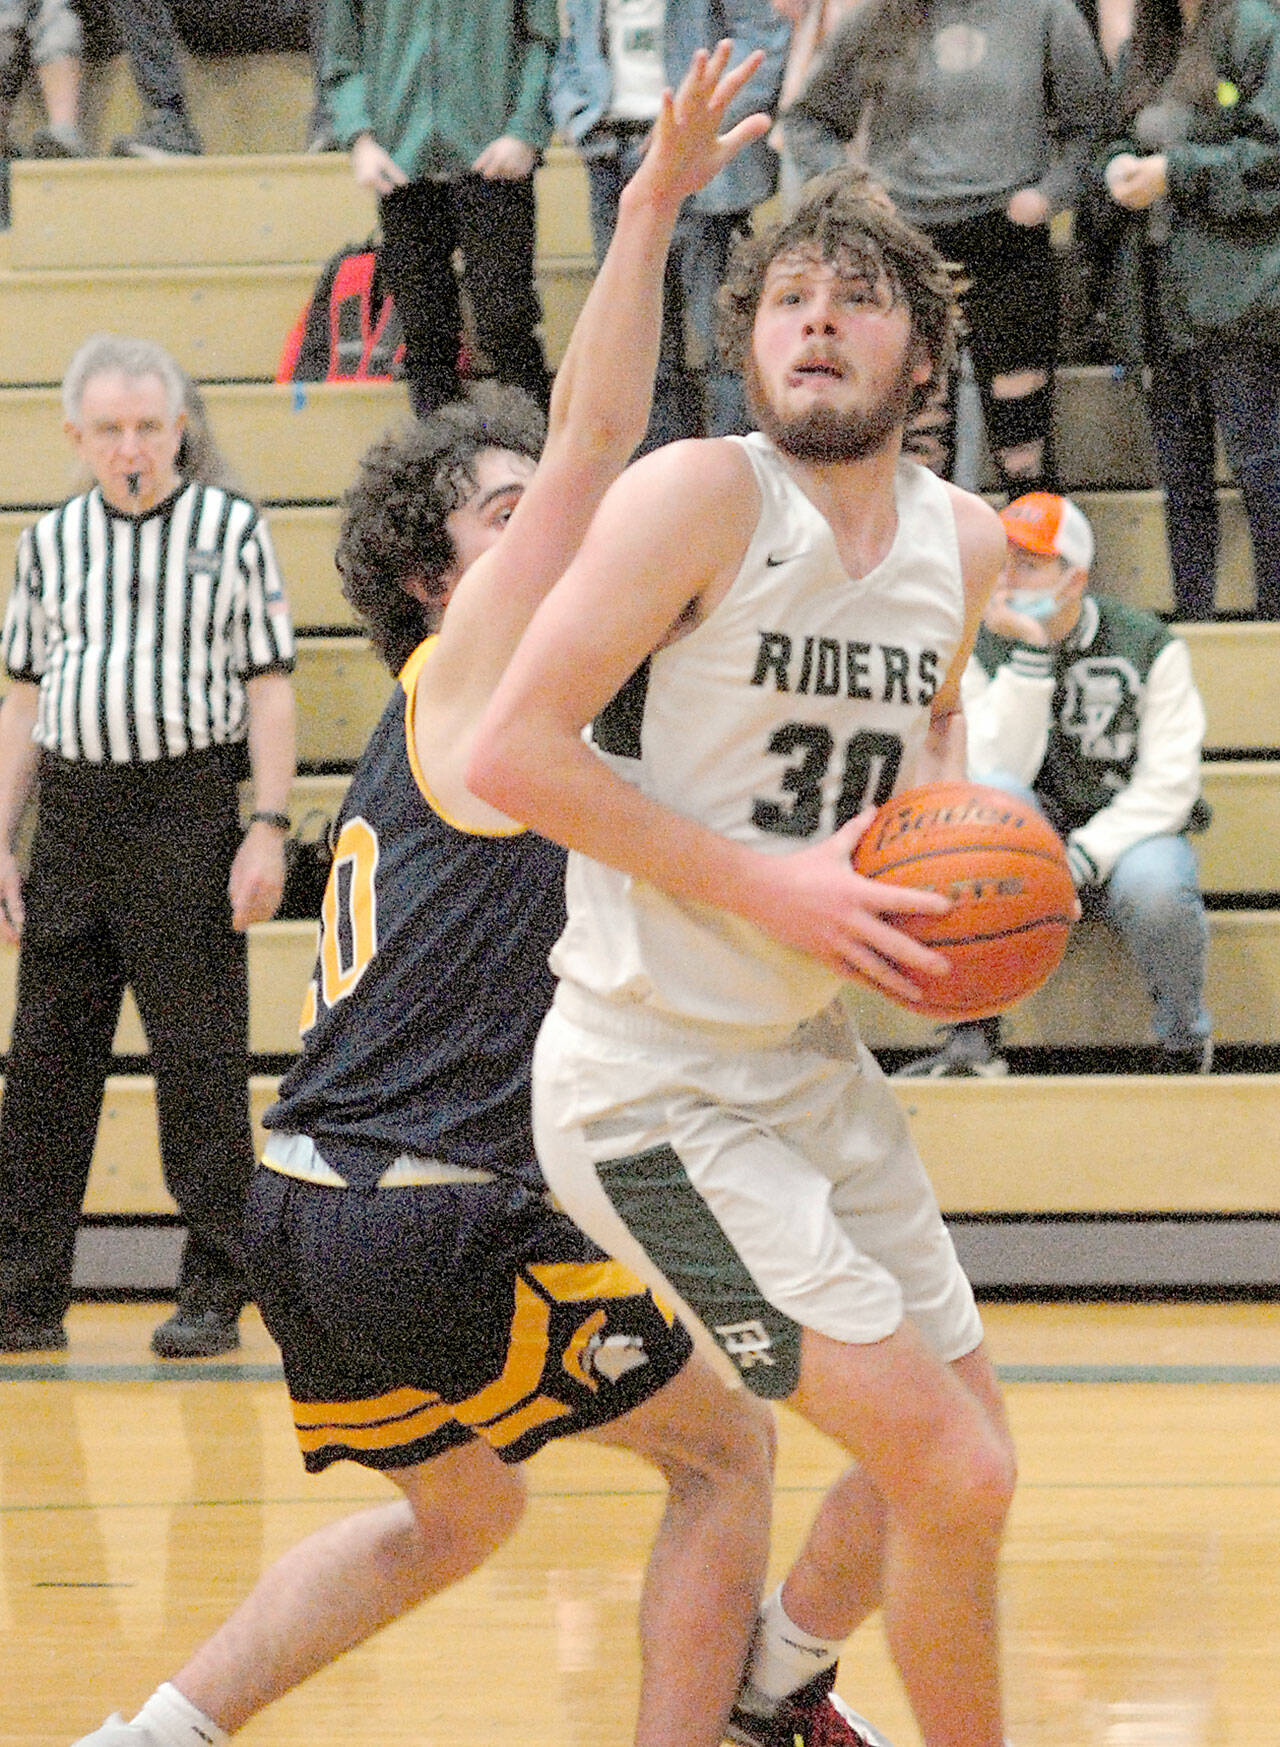 Port Angeles’ Wyatt Dunning, right, looks for an opening as he holds off the defense of Bainbridge Island’s Ben Nylund on Tuesday in Port Angeles. (Keith Thorpe/Peninsula Daily News)